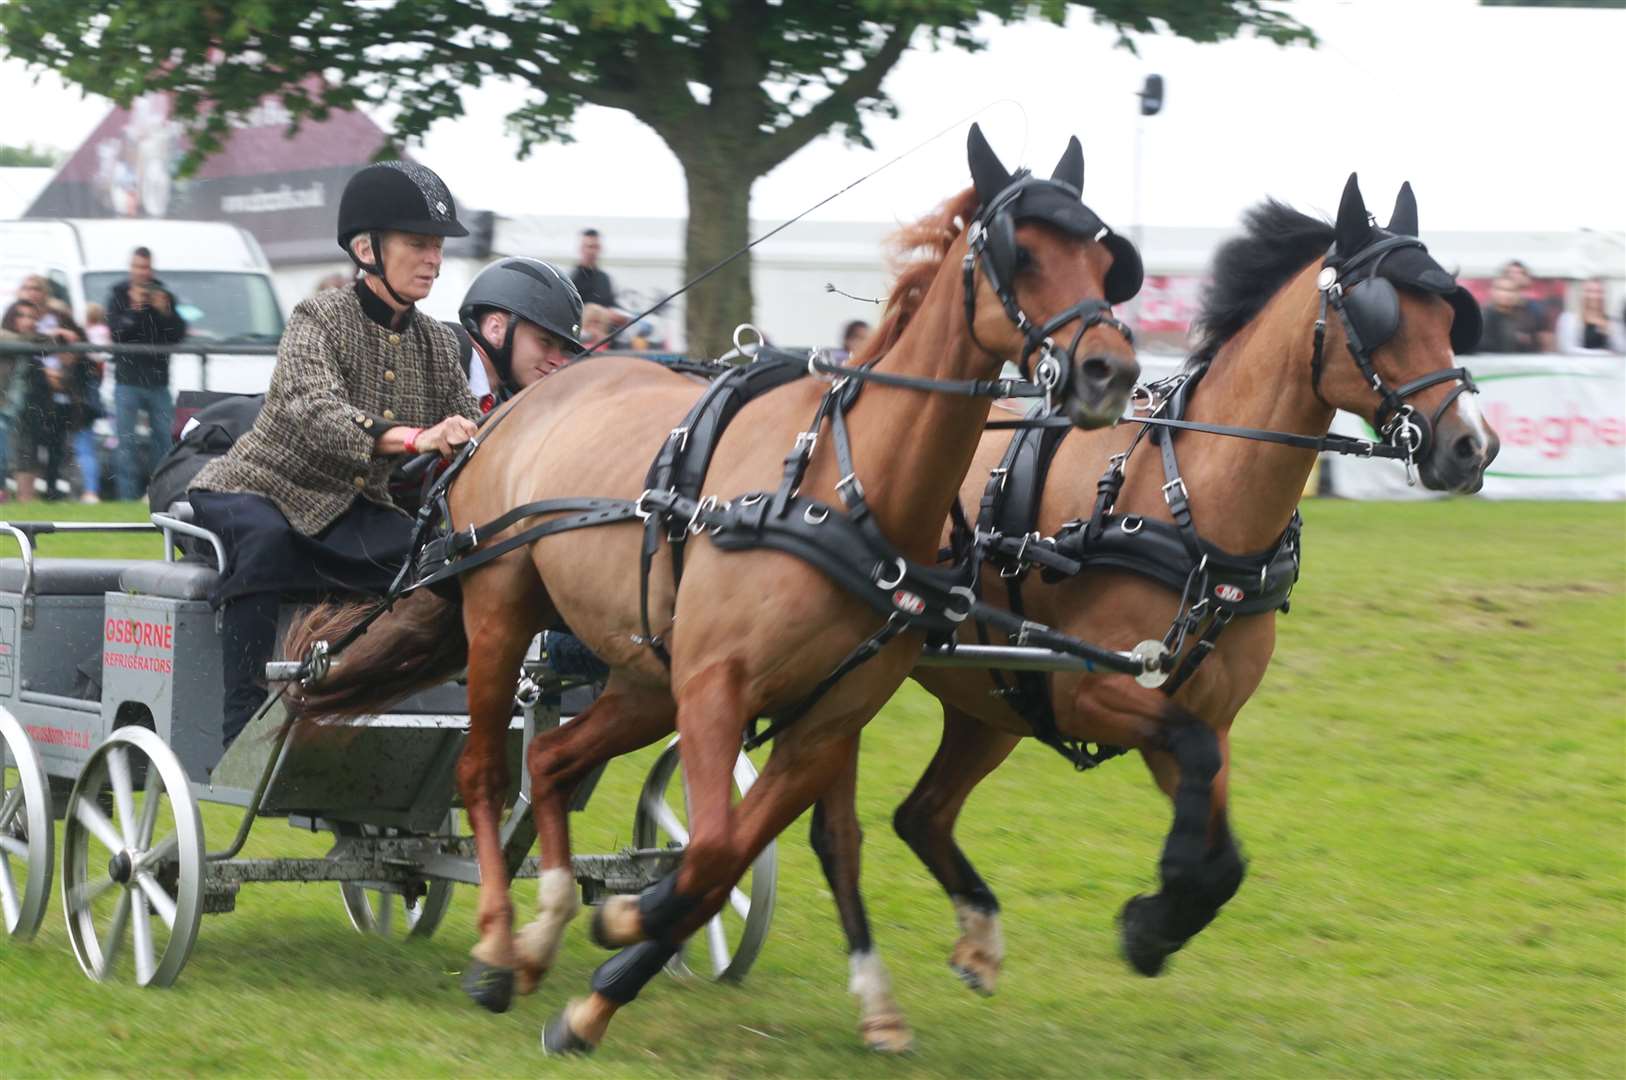 A scurry driving competition at a previous Kent County Show Picture: John Westhrop